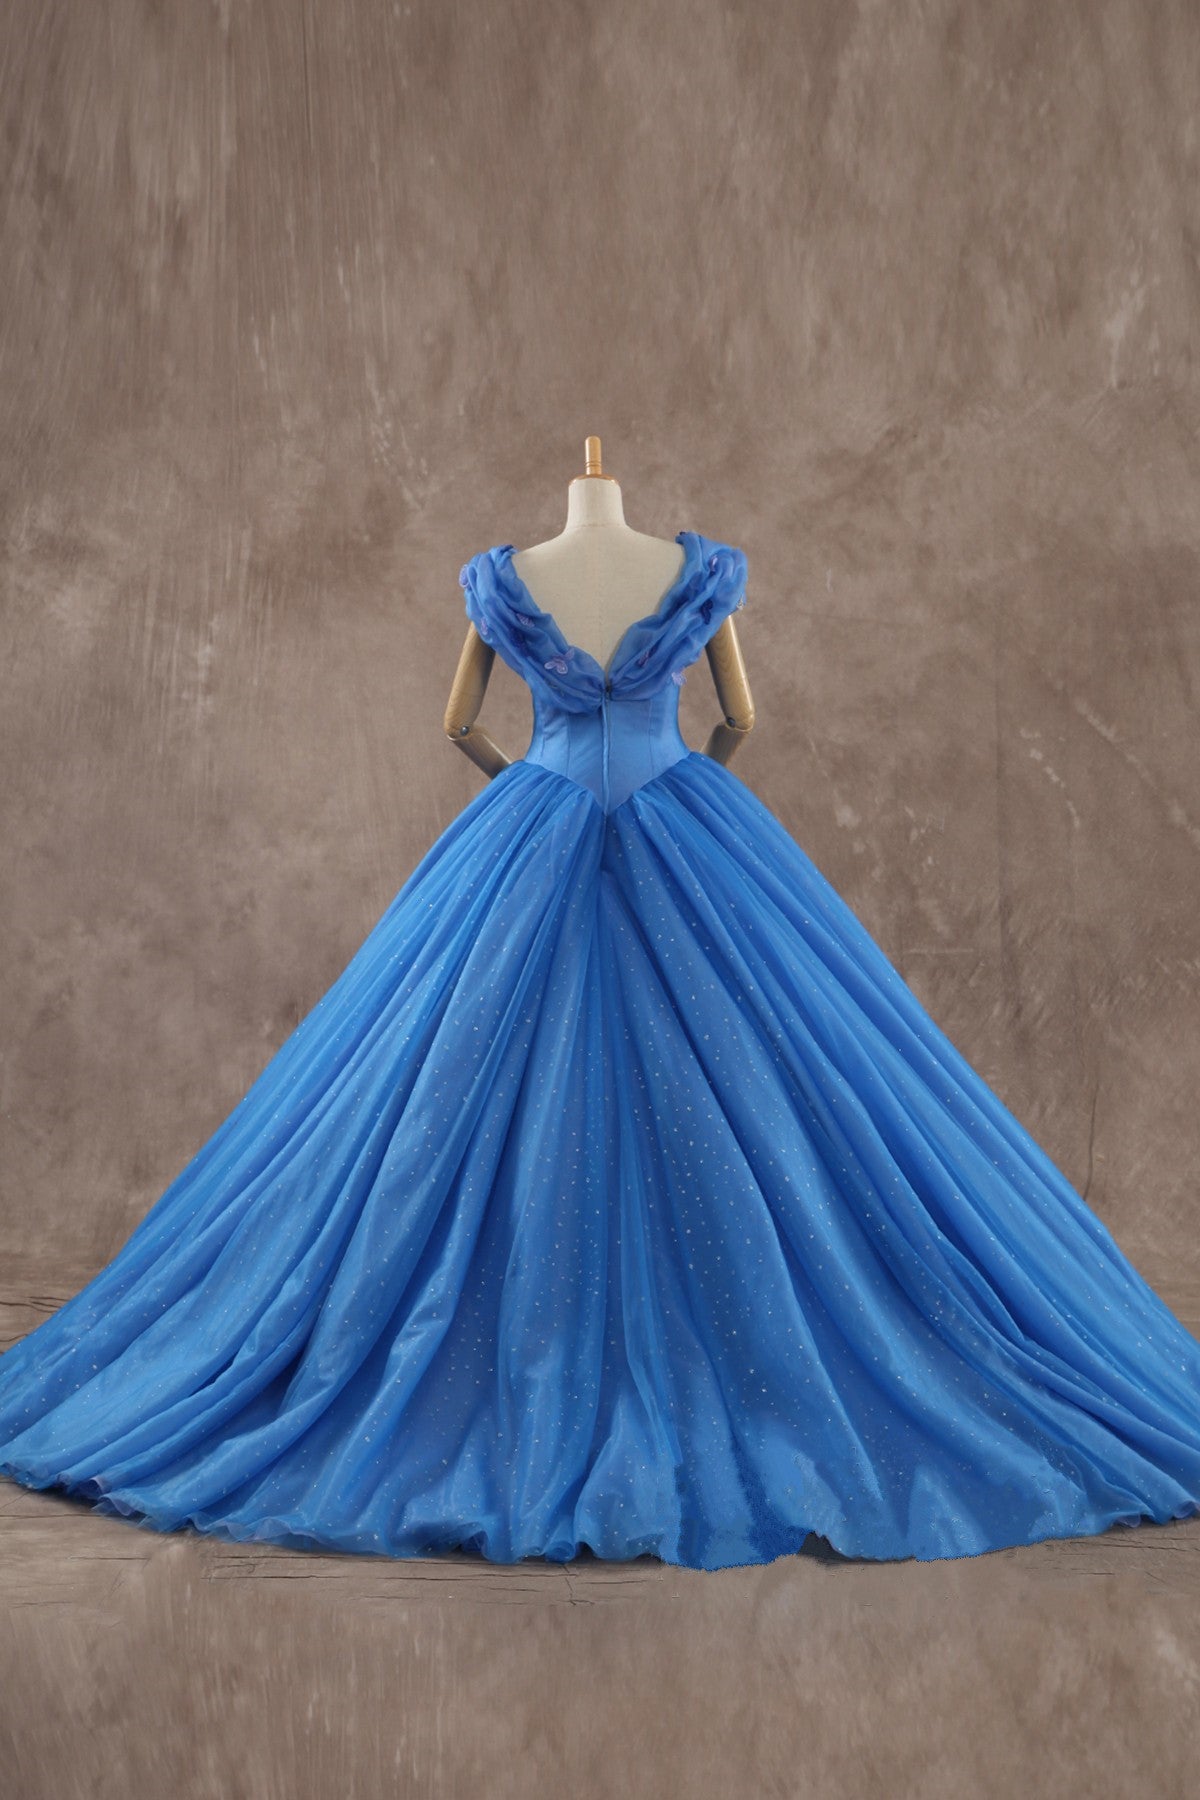 Cinderella Sky Blue Organza Dancing Prom Dresses 2021 Ball Gown  Off-The-Shoulder Short Sleeve Butterfly